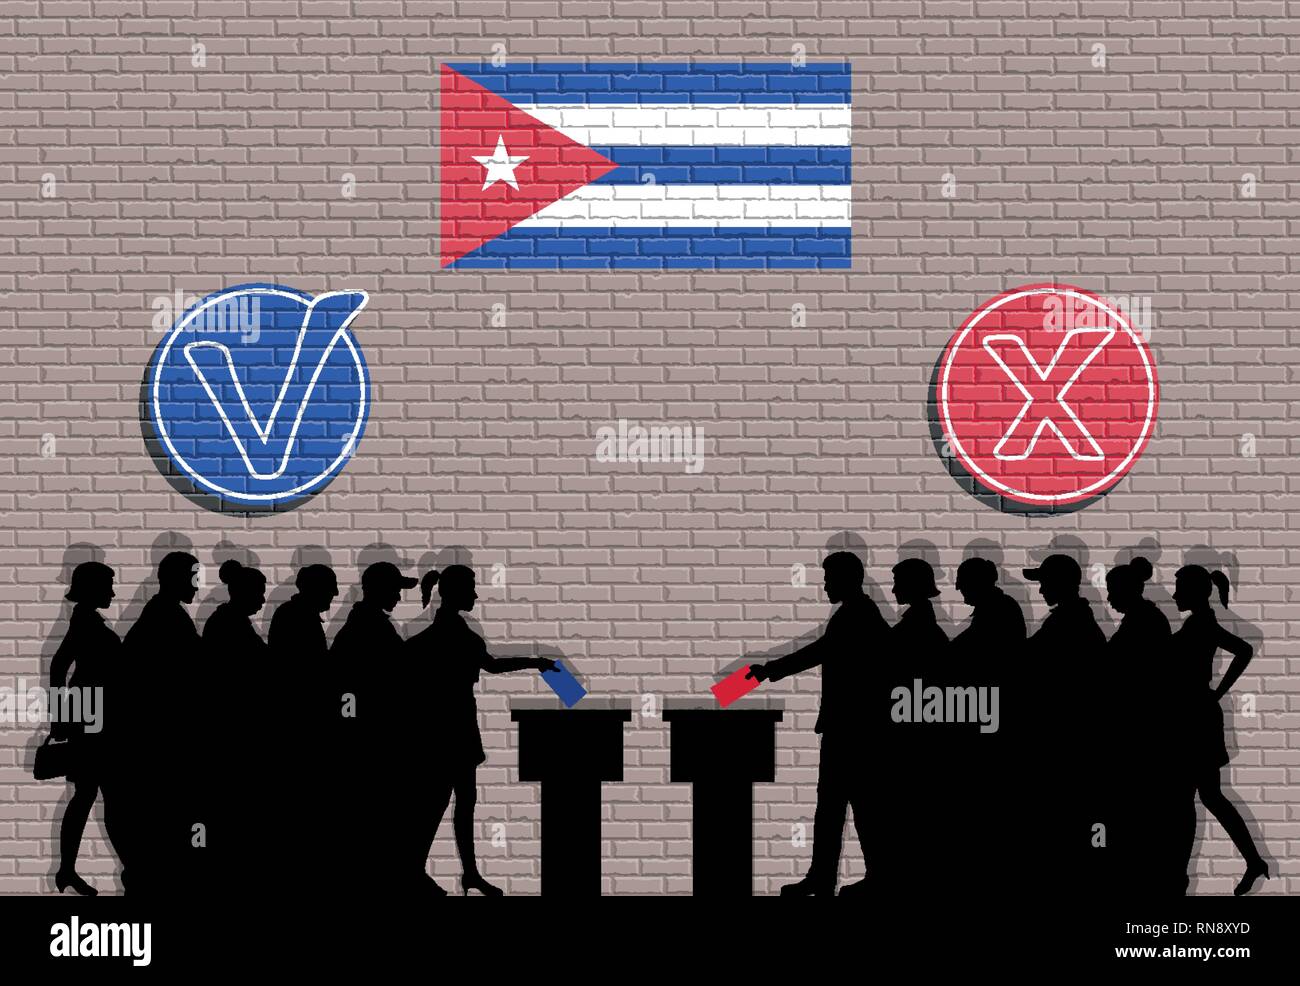 Cuban voters crowd silhouette in election with check marks and Cuba flag graffiti. All the silhouette objects, icons and background are in different l Stock Vector